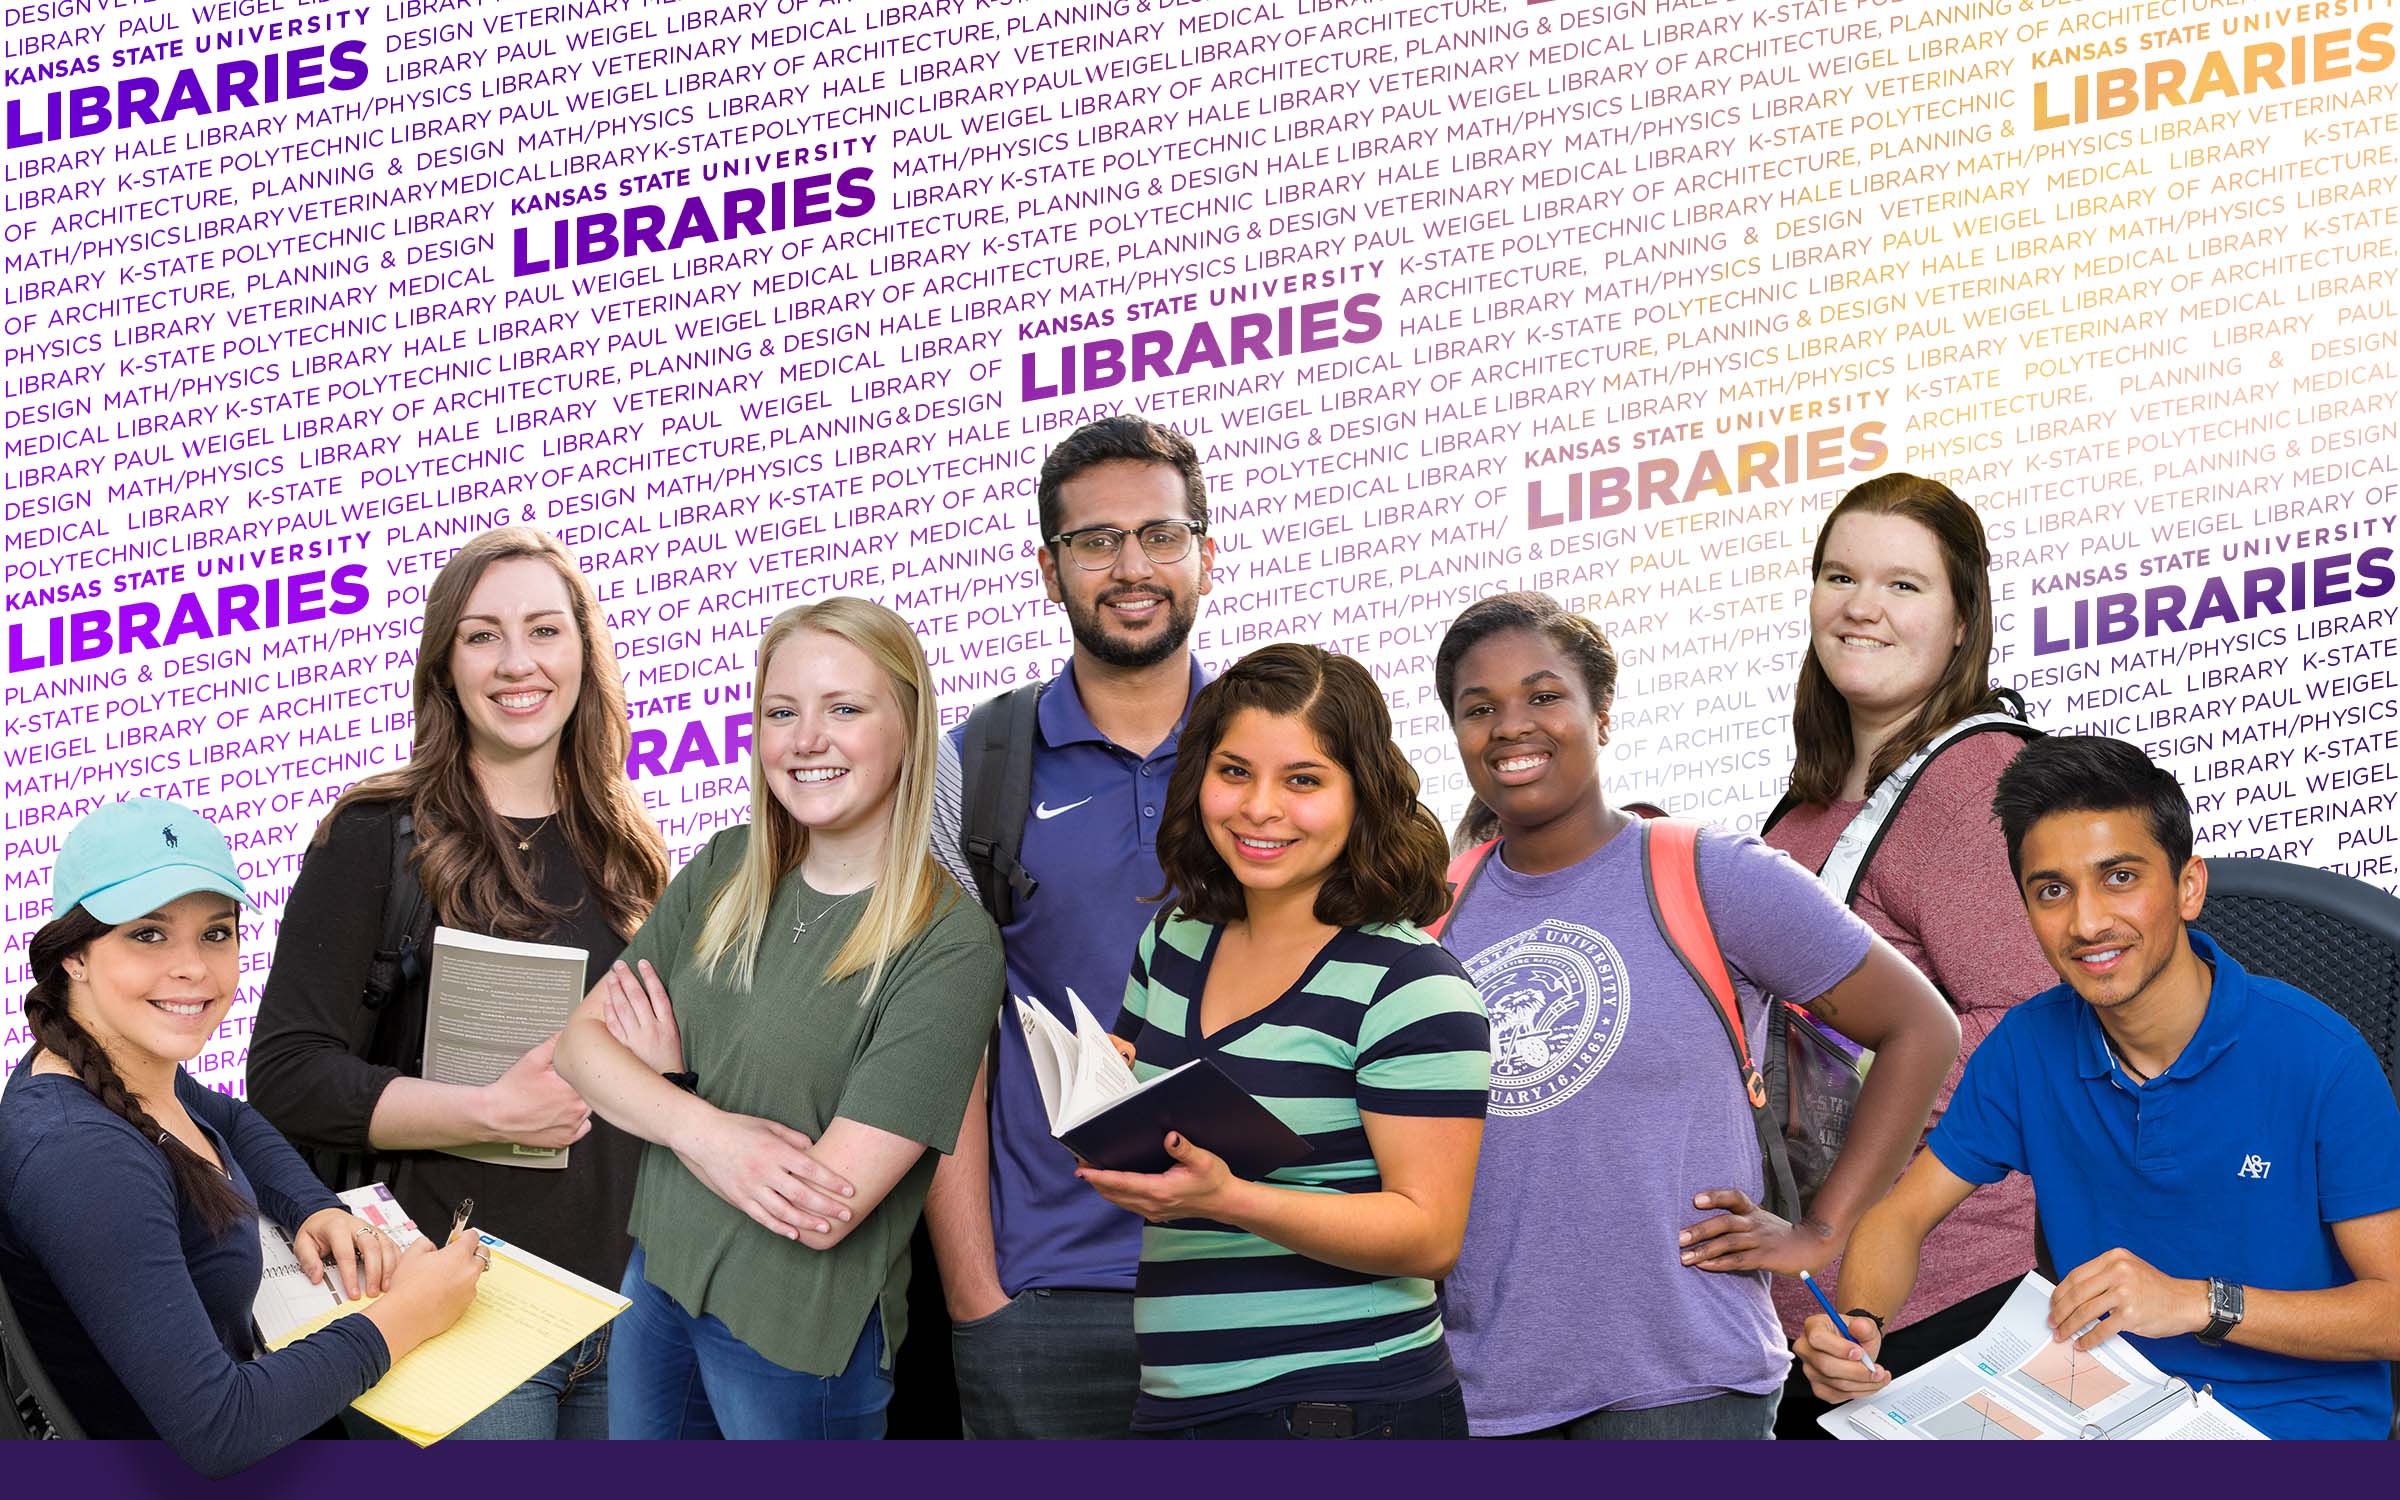 K-State Libraries students